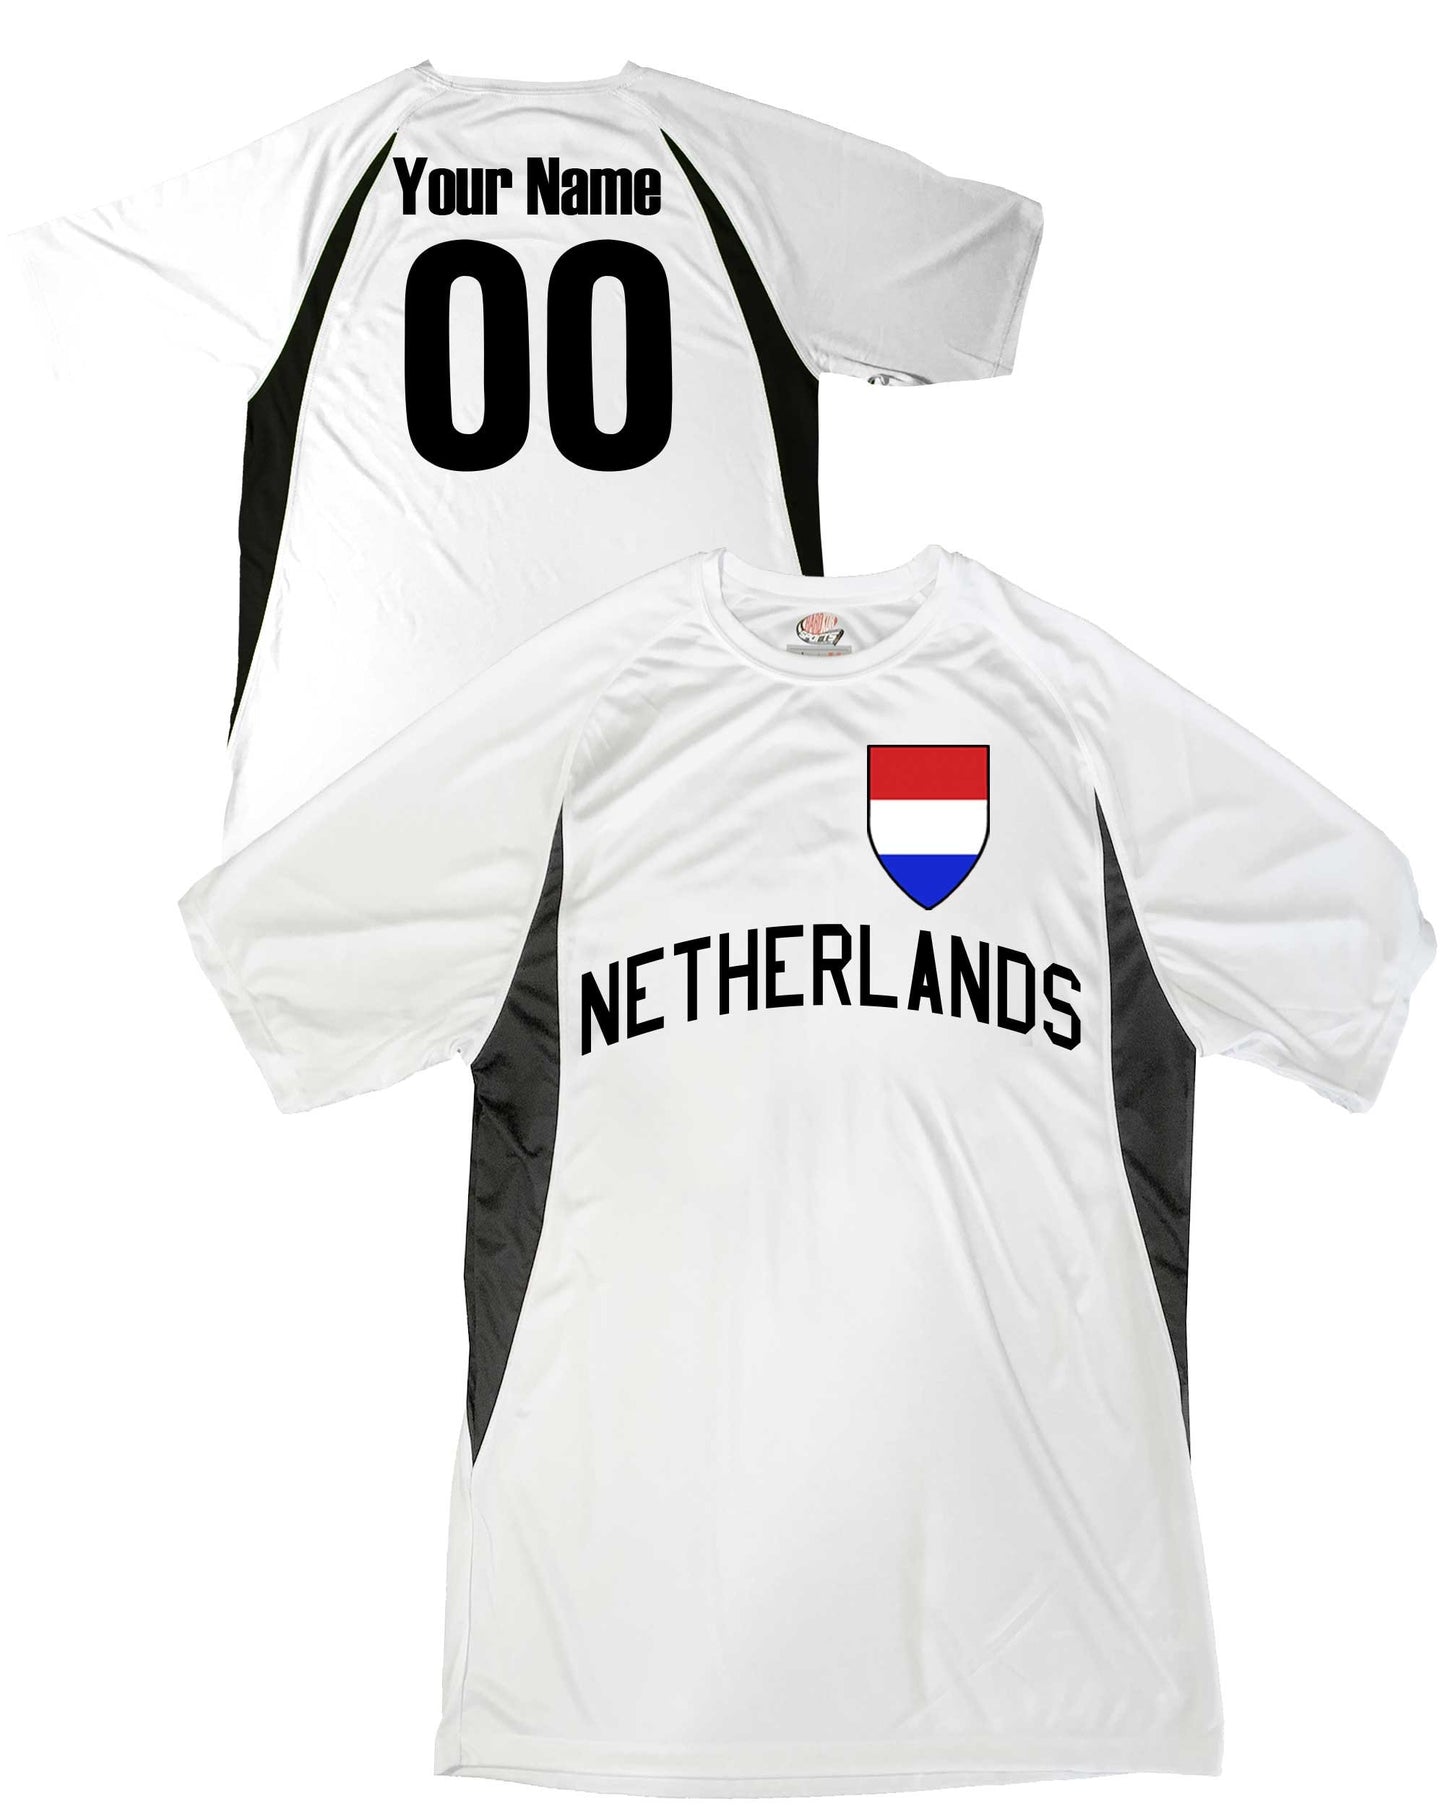 Netherlands Soccer Jersey Shield Design Personalized with Your Names and Numbers in Your choice of Popular Colors